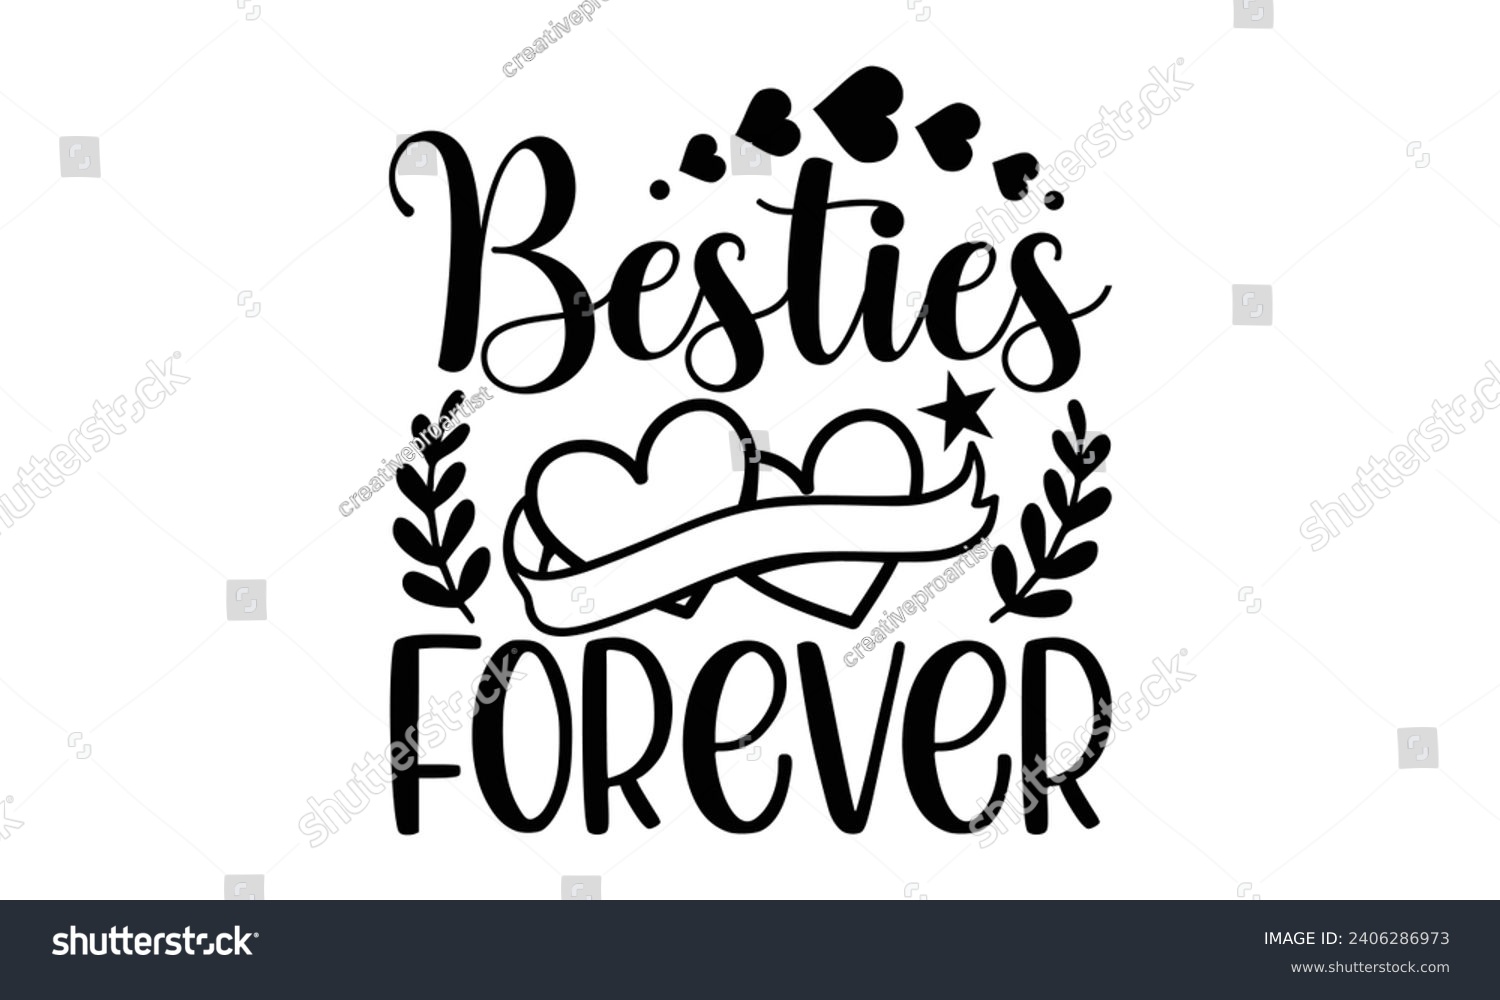 SVG of Besties Forever- Best friends t- shirt design, Hand drawn vintage illustration with hand-lettering and decoration elements, greeting card template with typography text svg